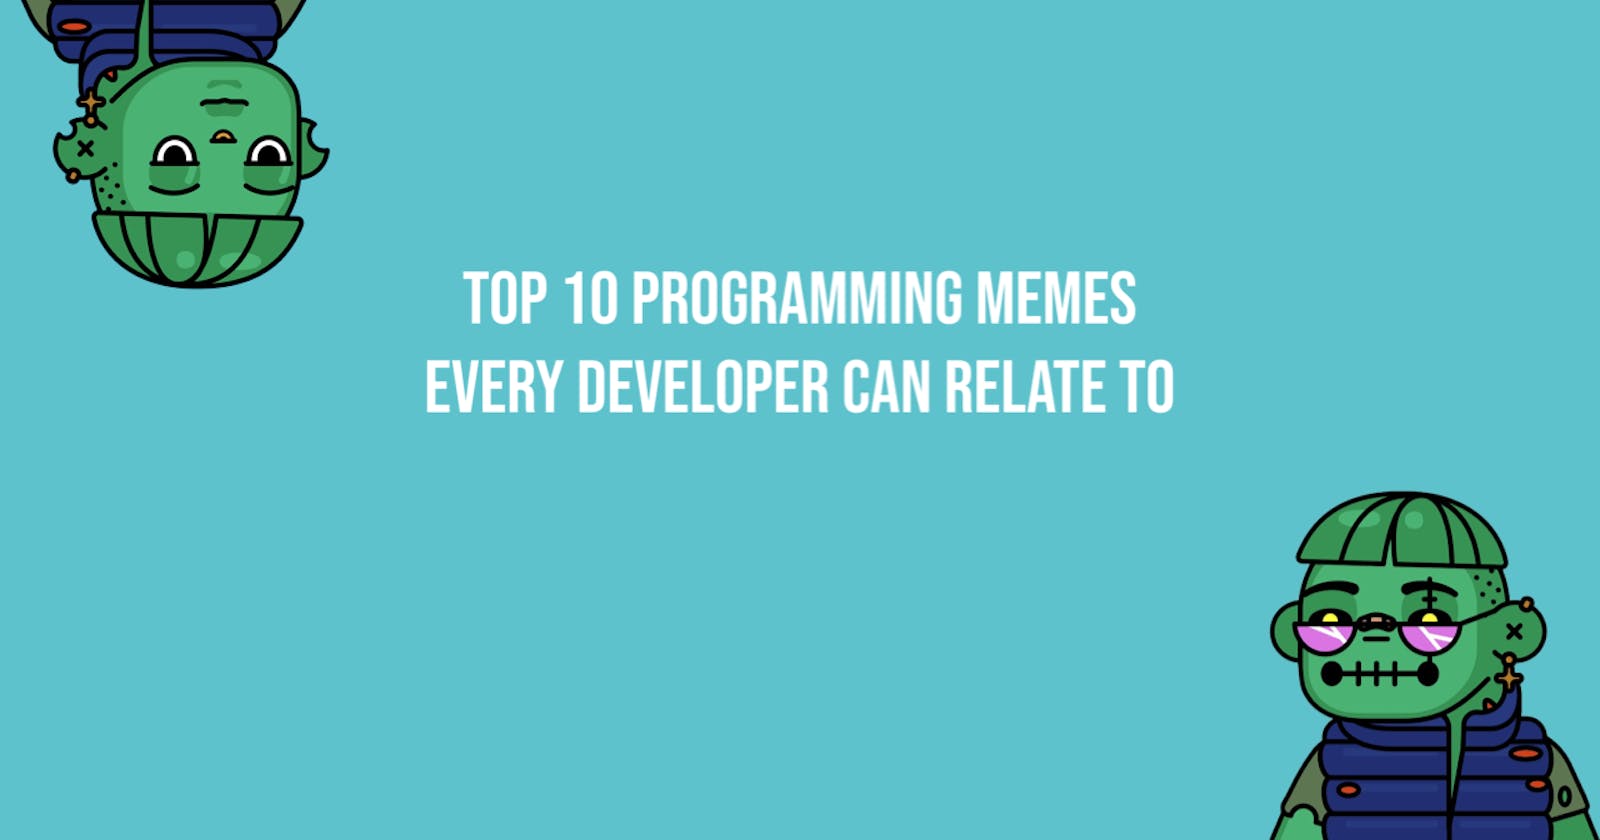 Top 10 Programming Memes Every Developer Can Relate To